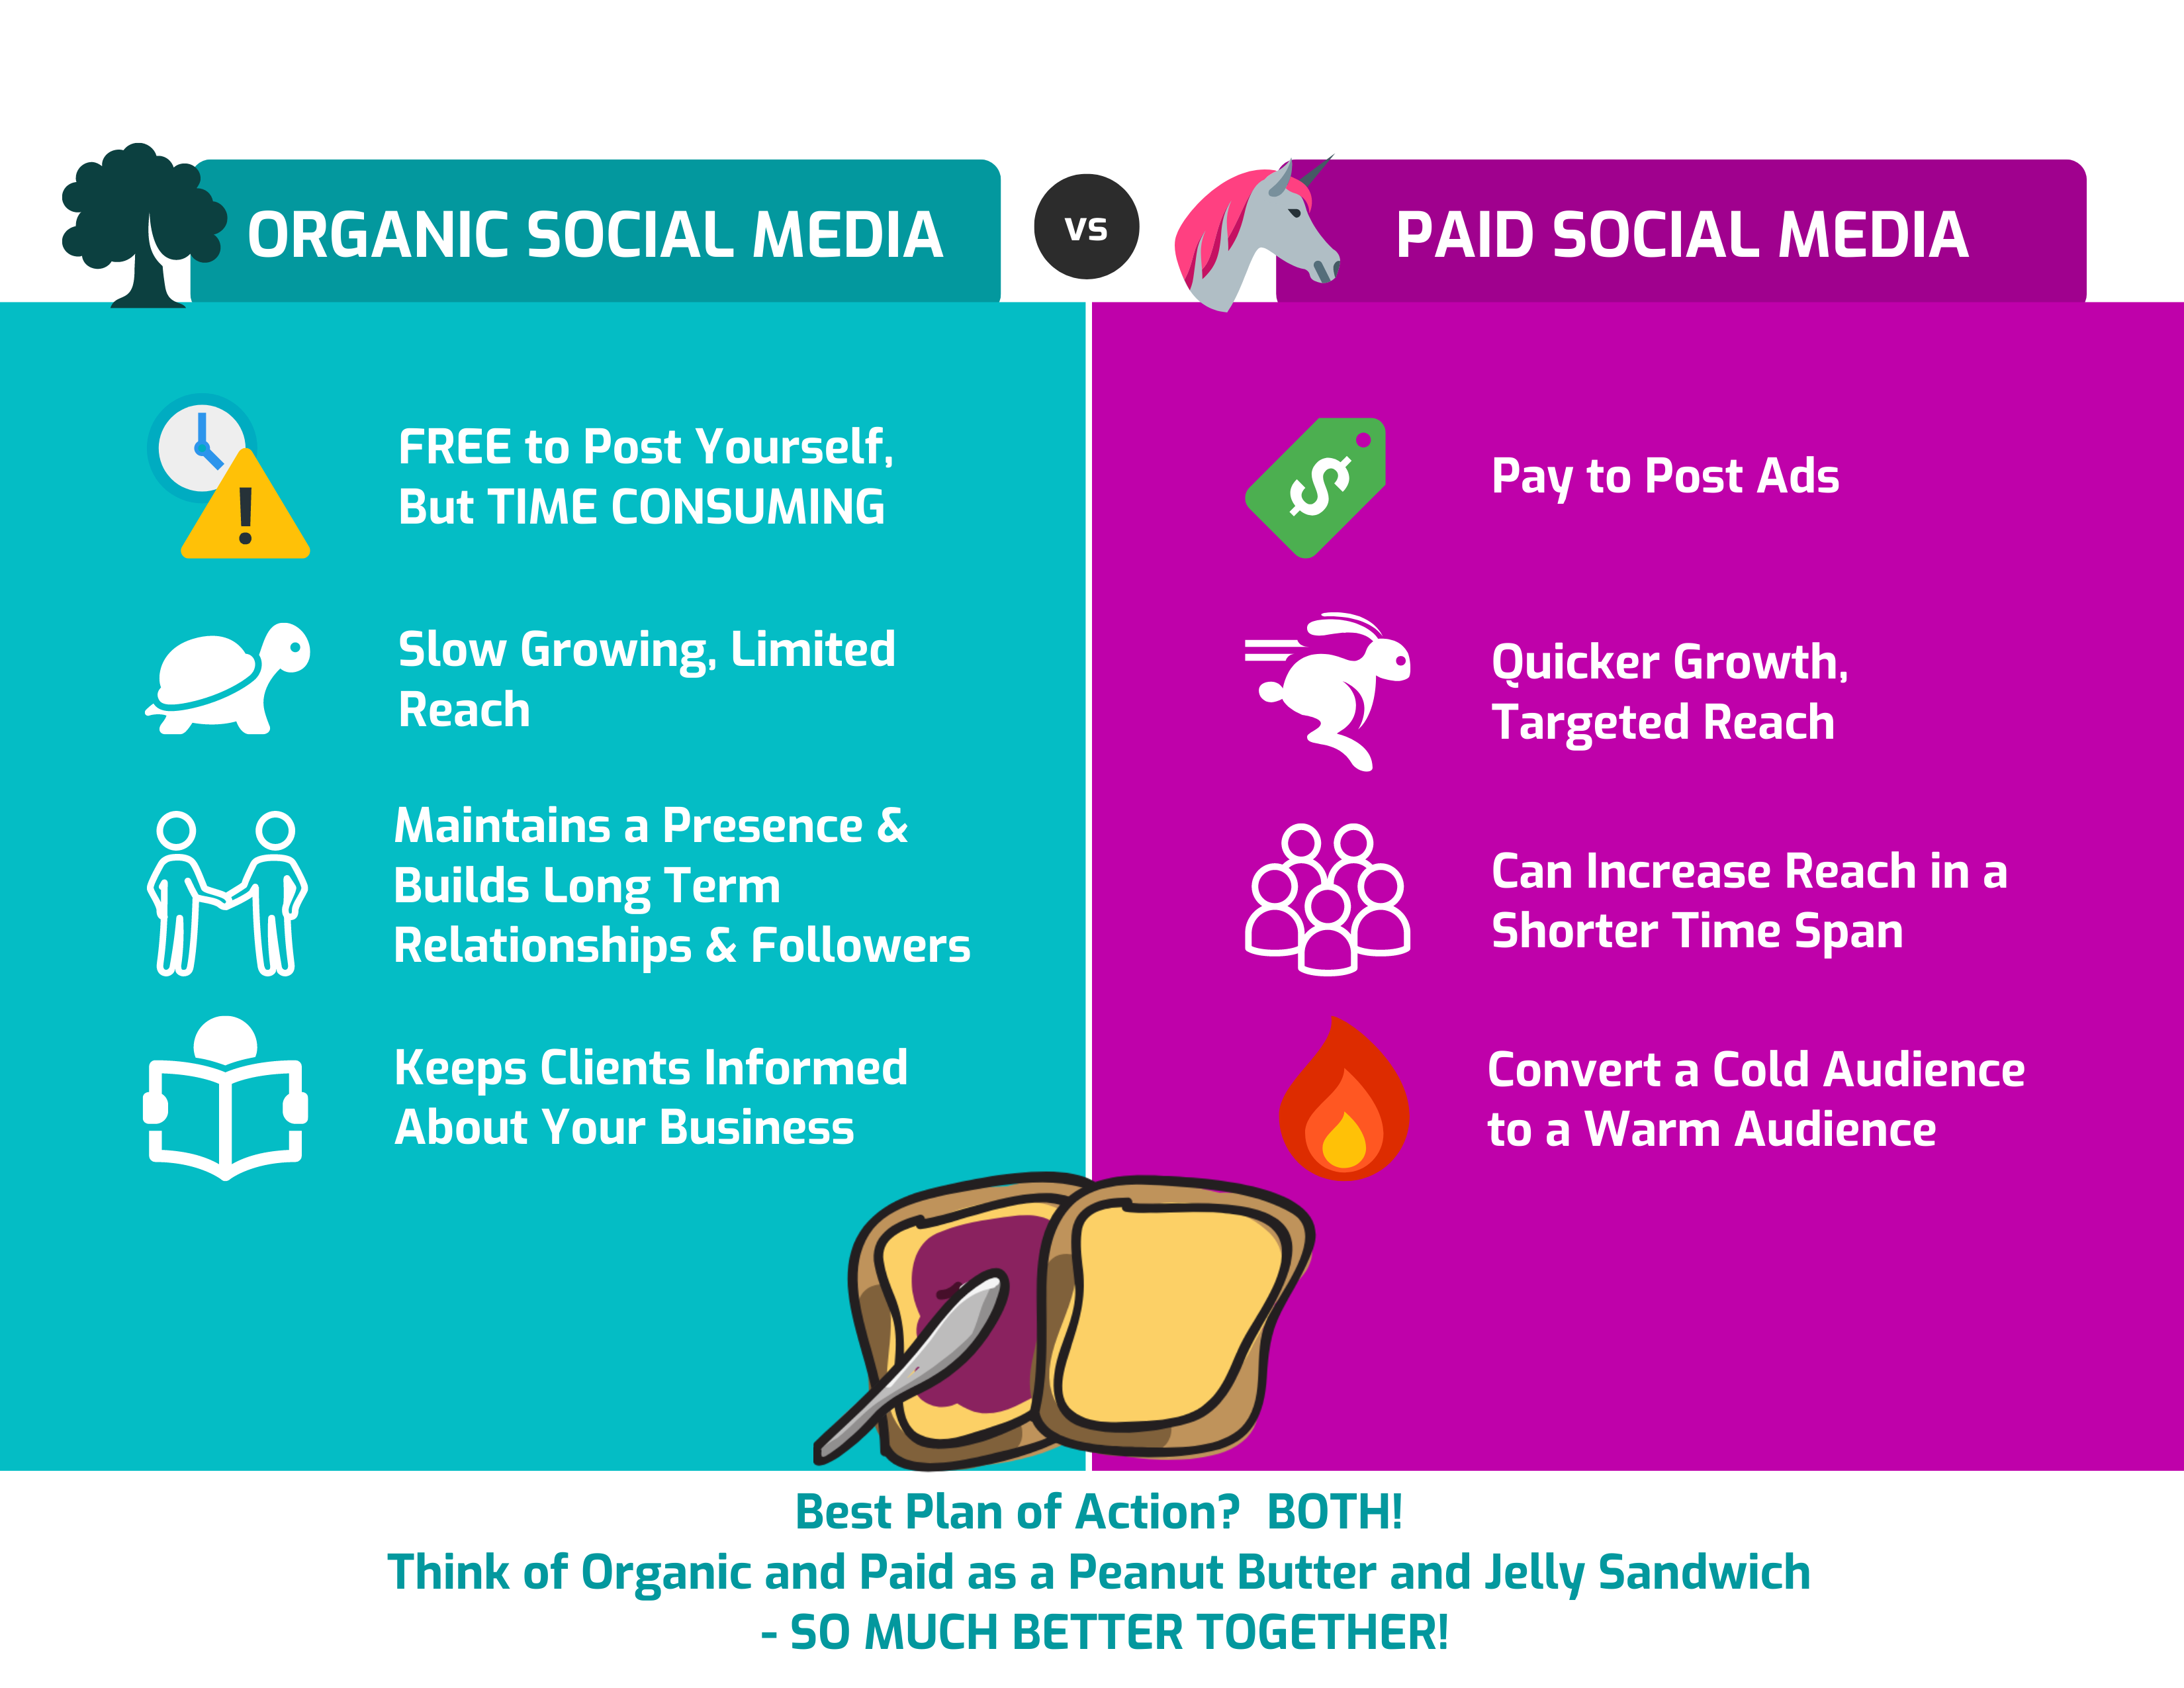 WGSD Virtual Assistant Organic Vs Paid Social Media Peanut Butter and Jelly